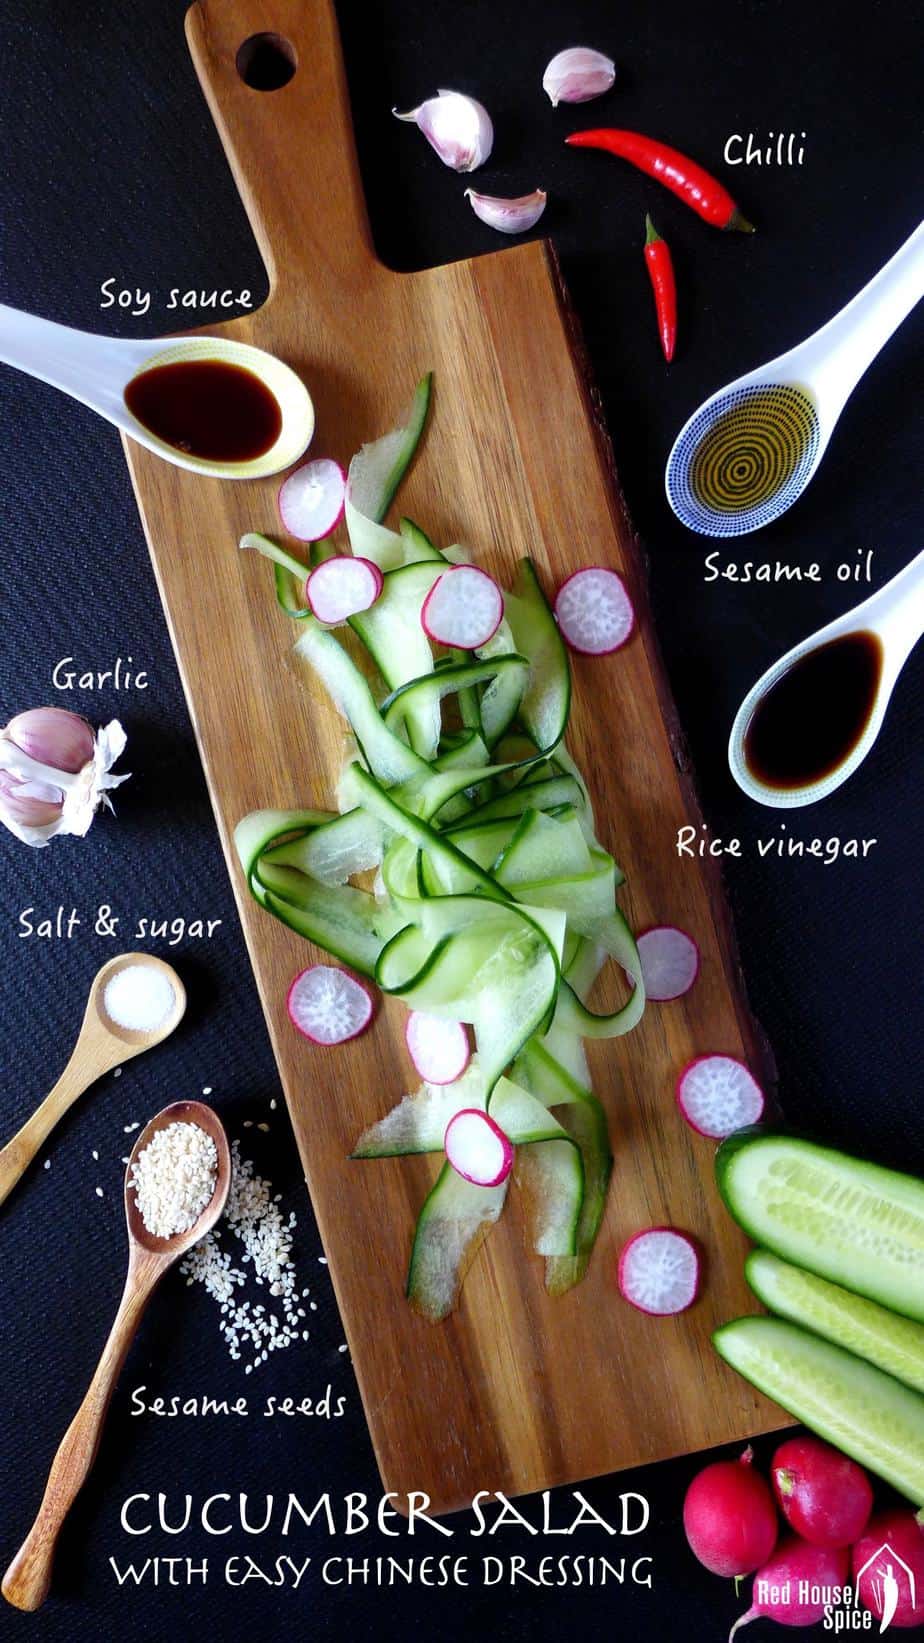 A classic cucumber salad with a new look. Flavoured with an easy Chinese dressing. Formula to make this versatile seasoning revealed.